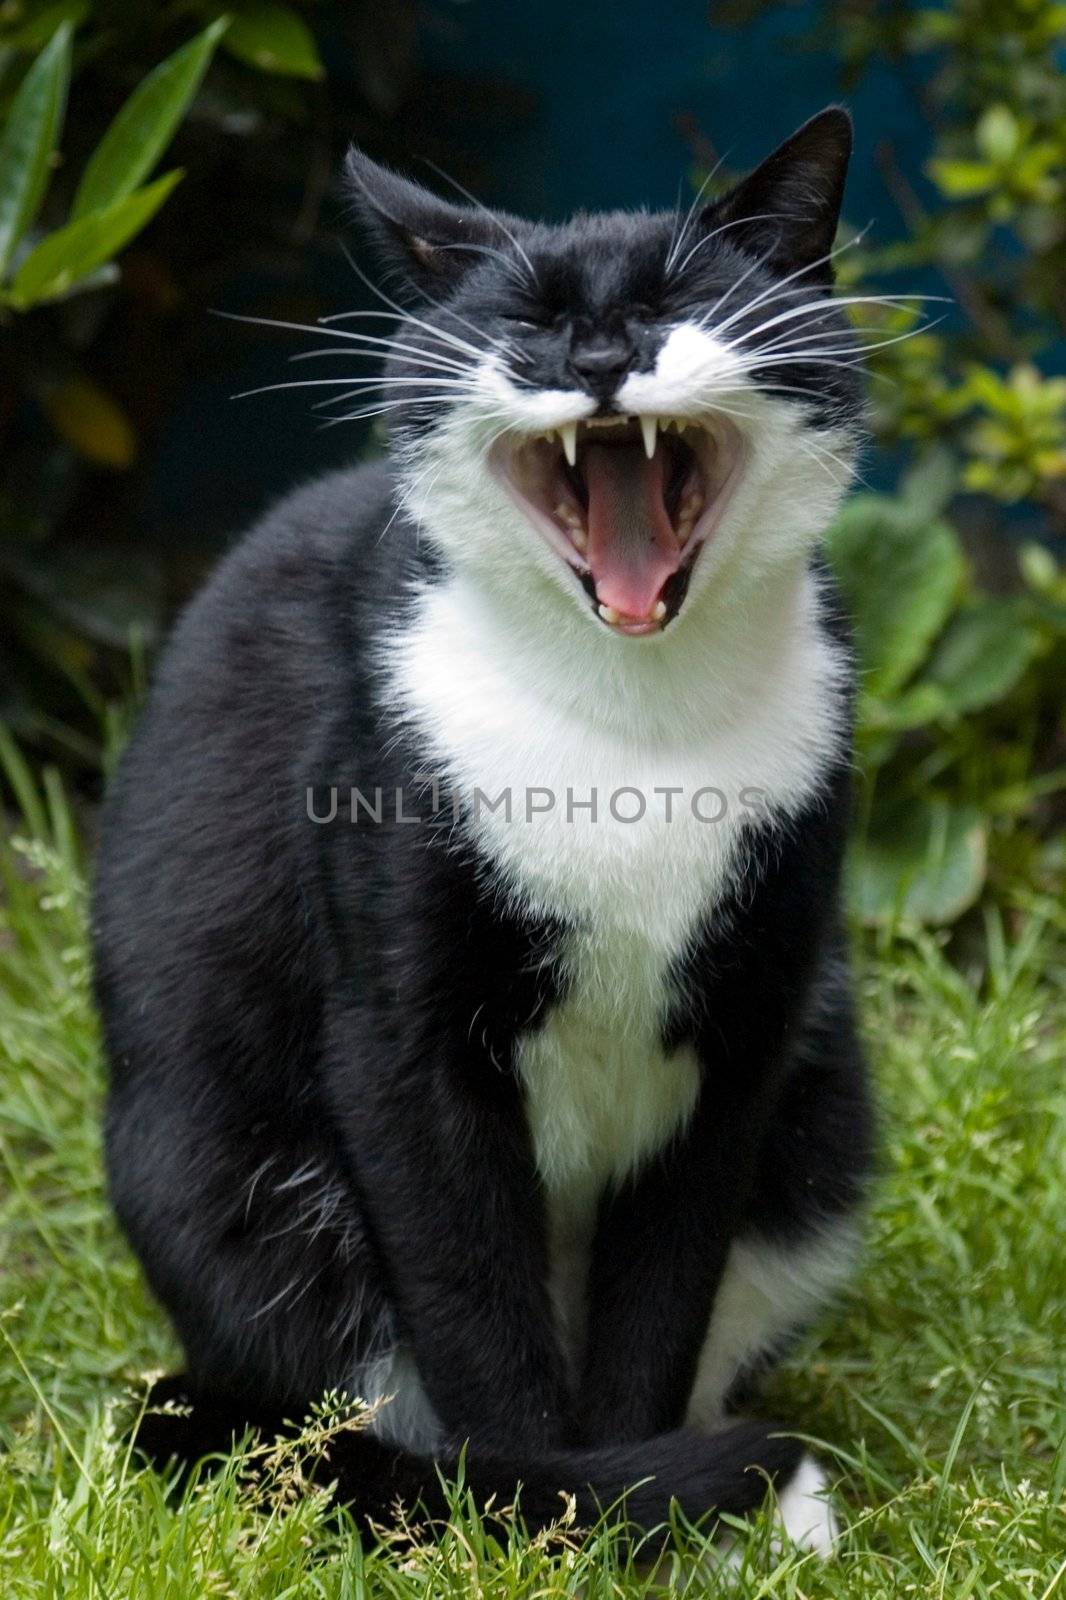 Yawning black and white cat on a green lawn